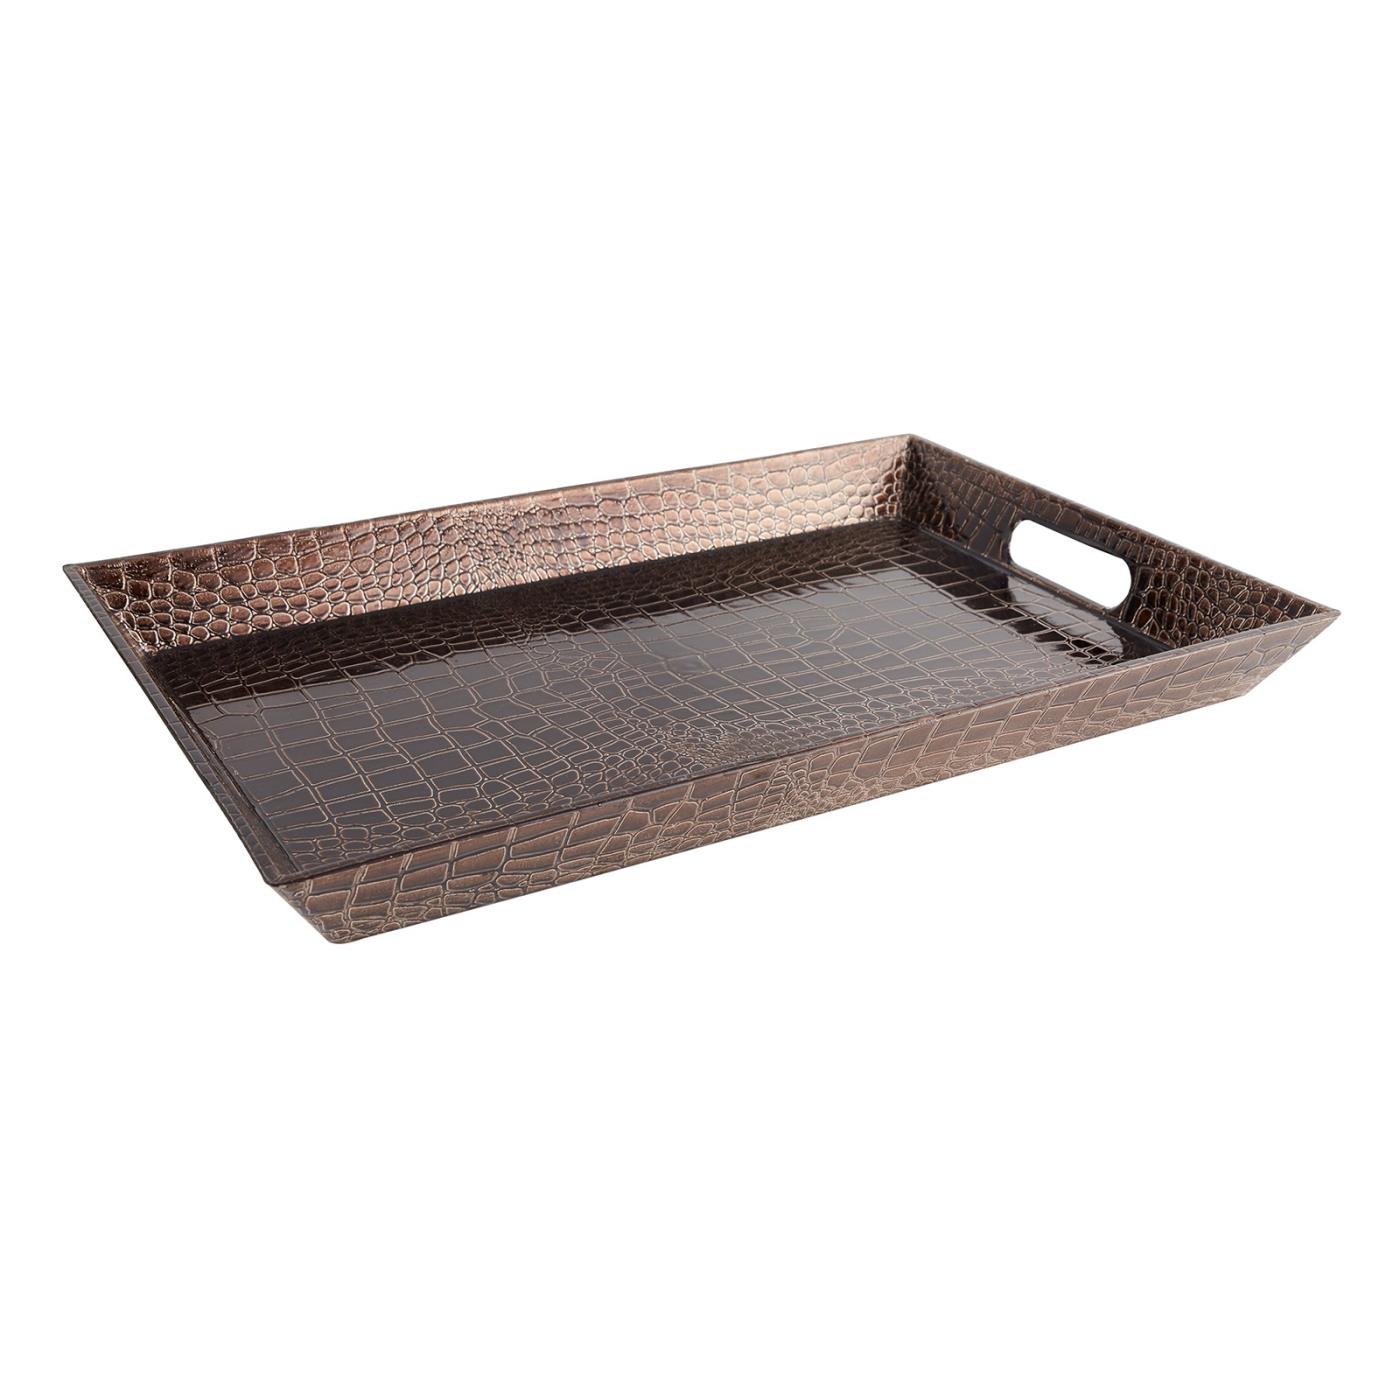 Brown Gator Lacquer Tray - 18" x 12"